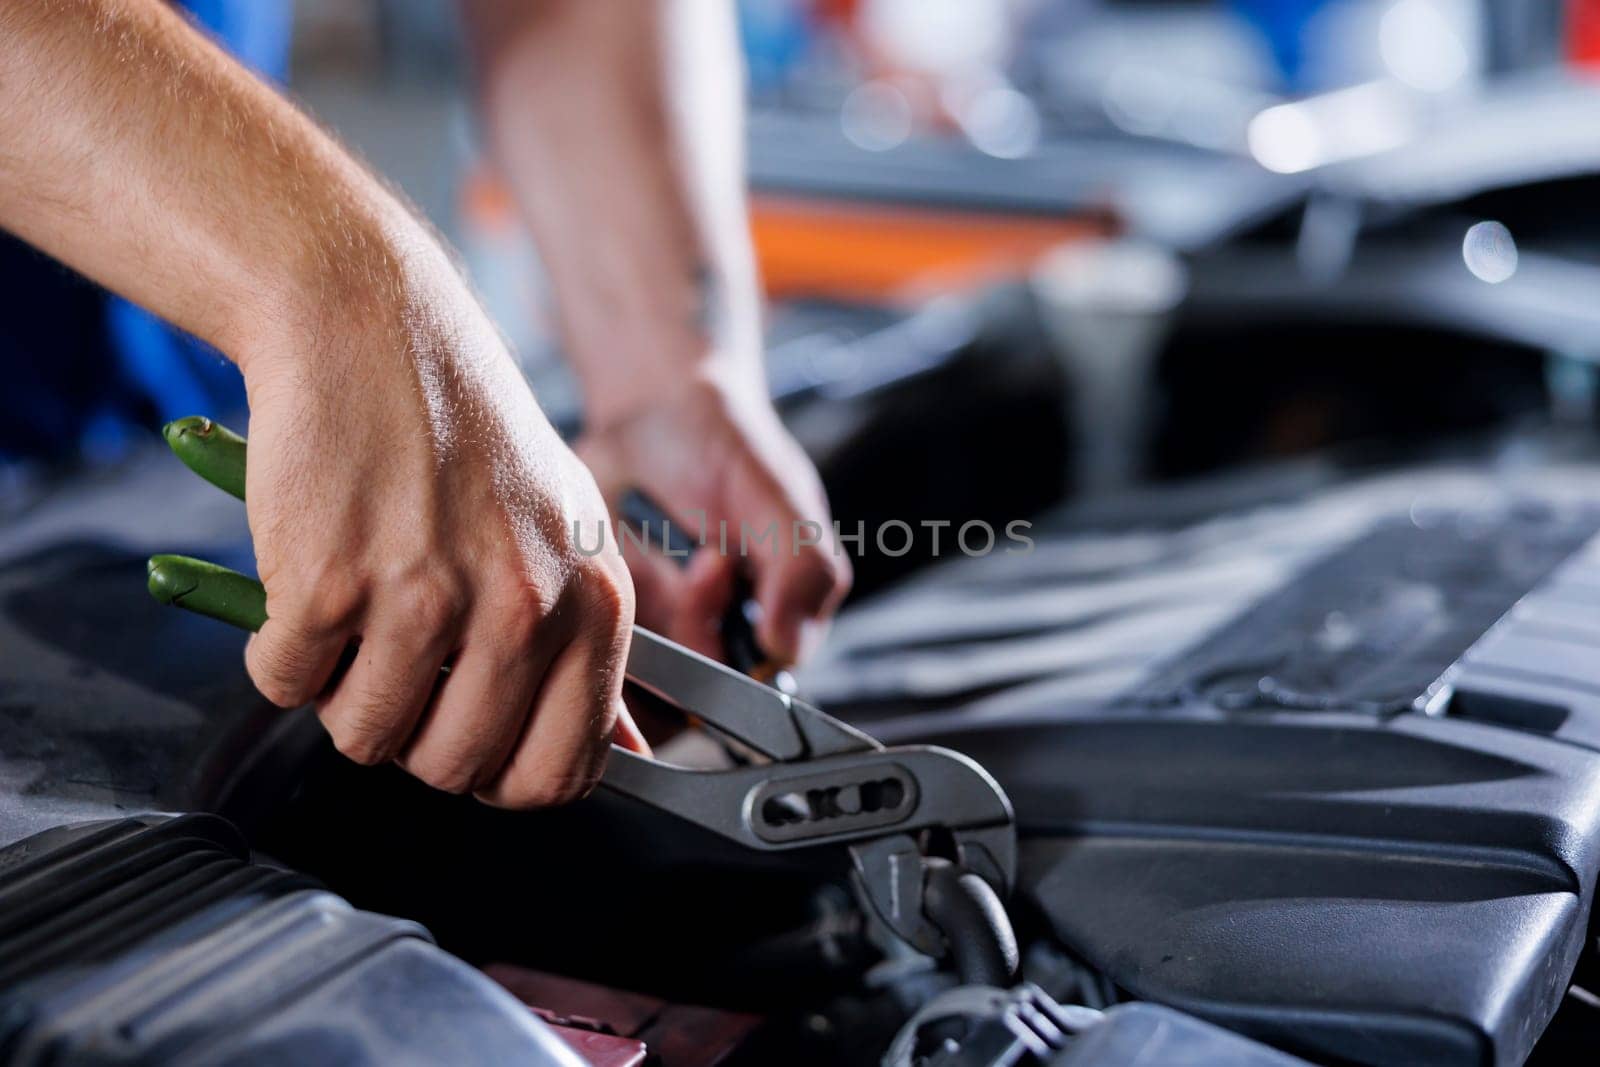 Car service technician expertly examines engine using advanced mechanical tools, ensuring ideal automotive performance and safety. Meticulous garage expert conducts routine vehicle checkup with pliers